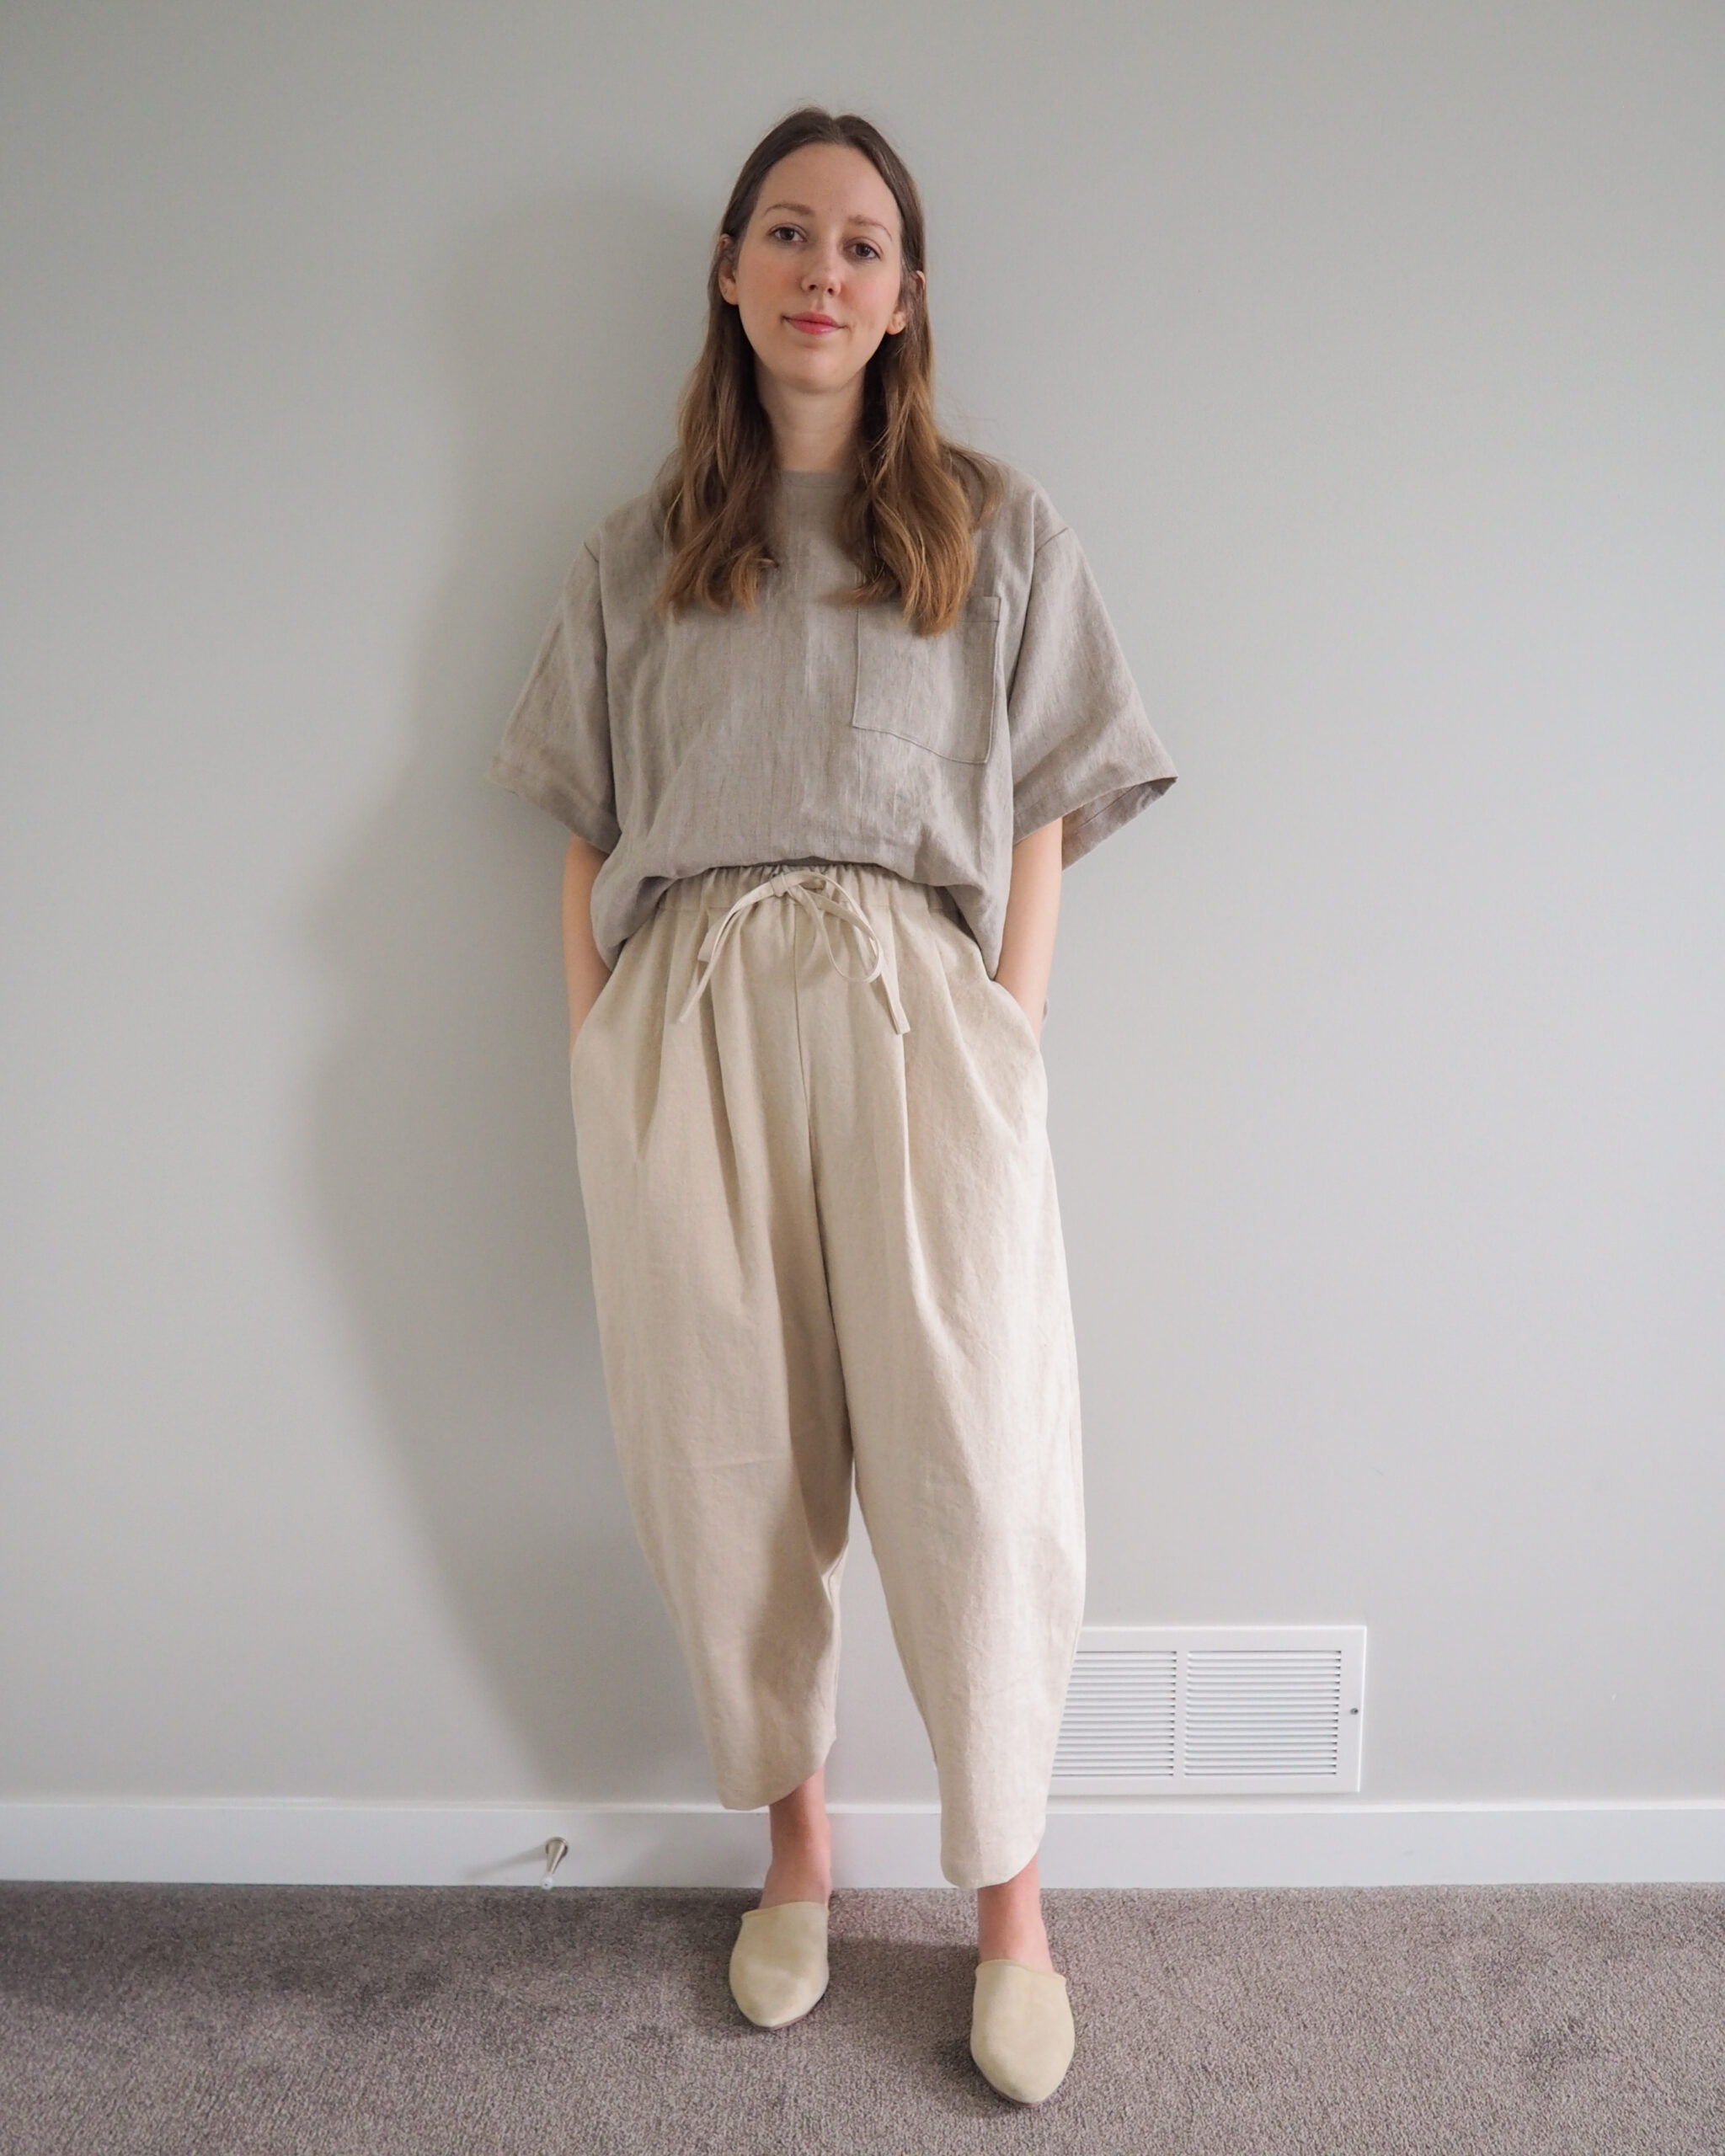 Ethel Pants by Style Arc - Sewing Pattern Review - Emily Lightly